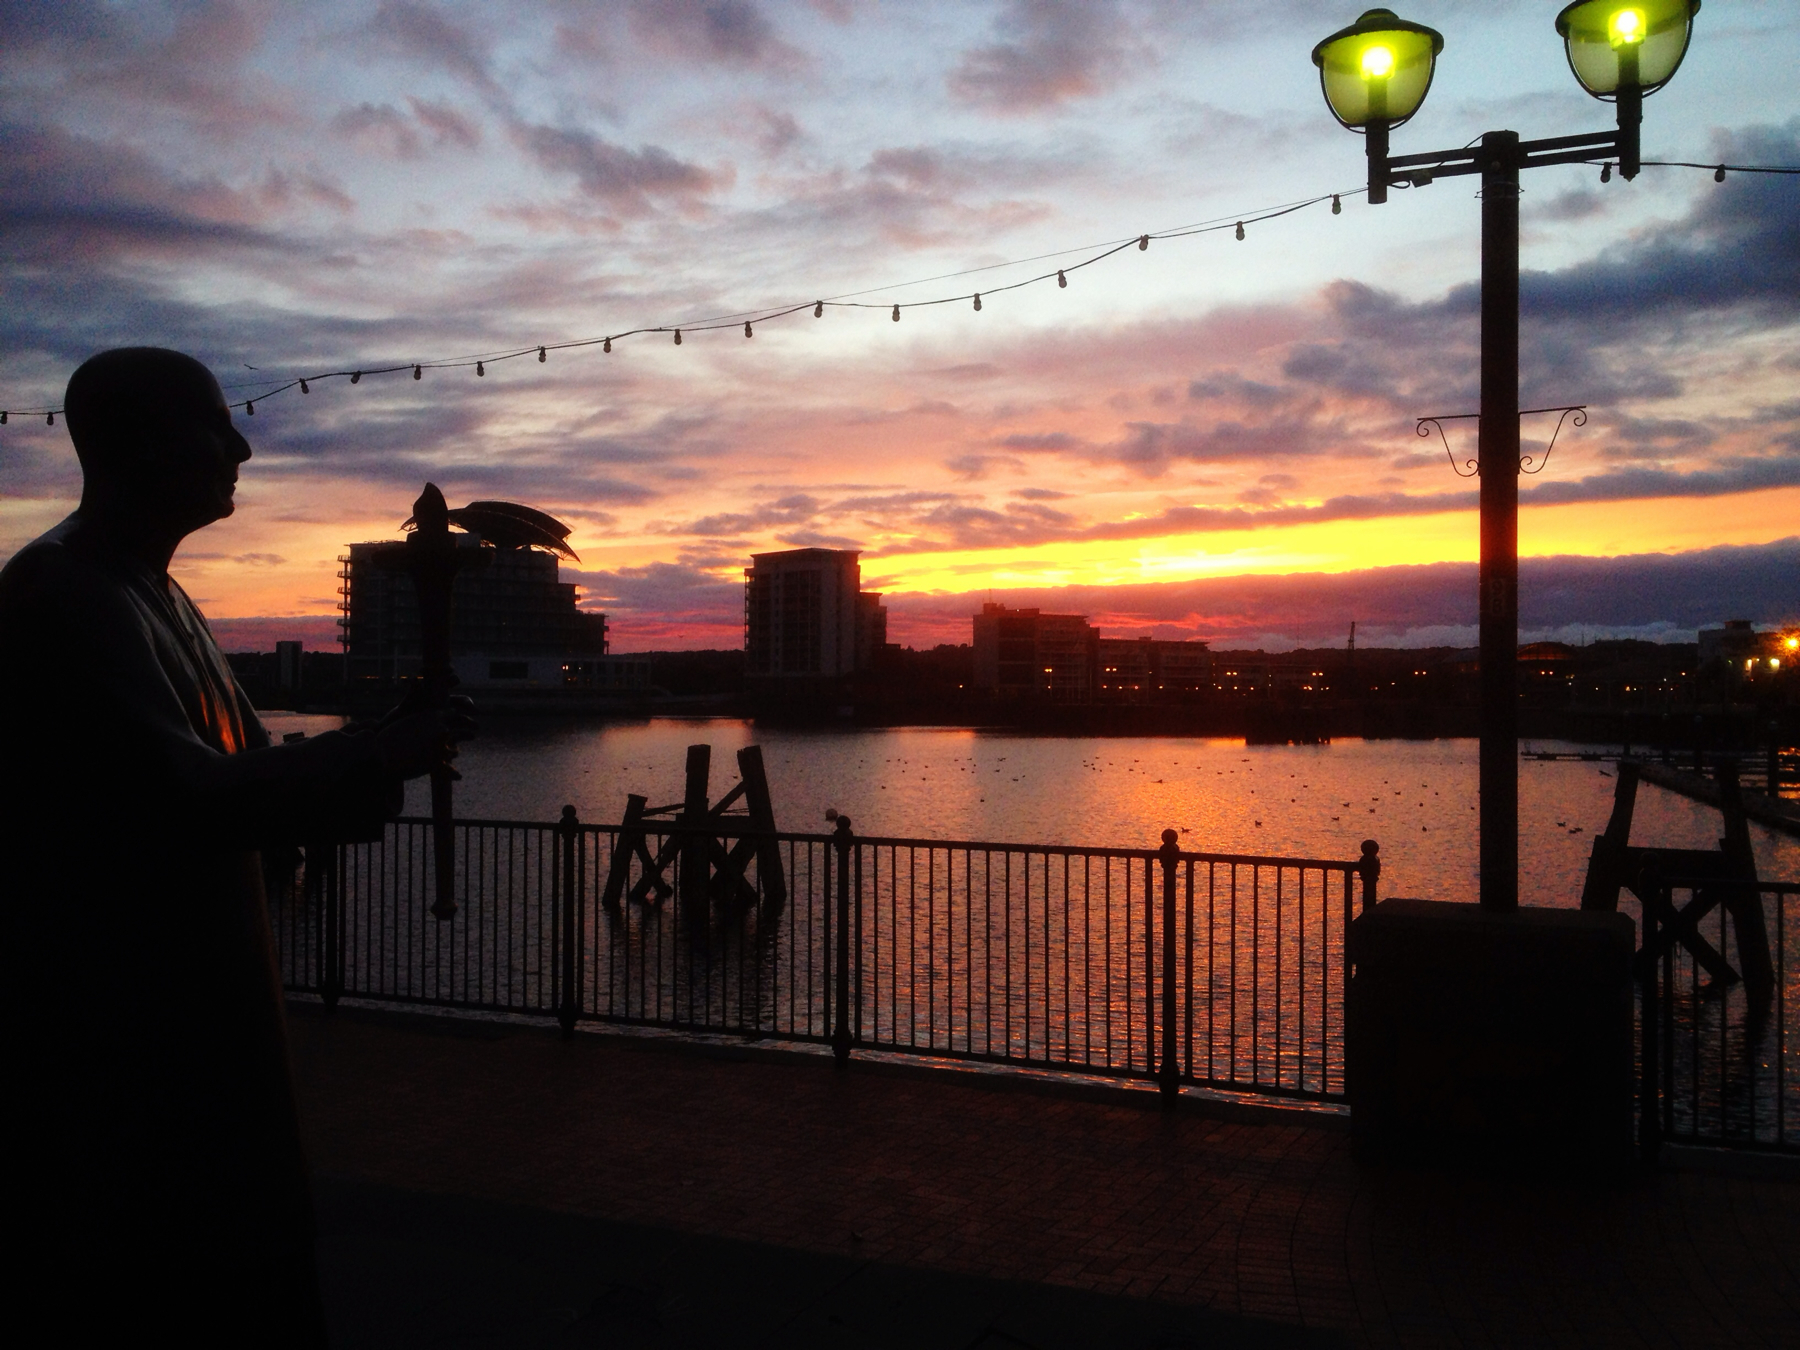 Silhouette of a statue by a waterfront at sunset, with street lights, buildings in the background, and a vividly colored sky.